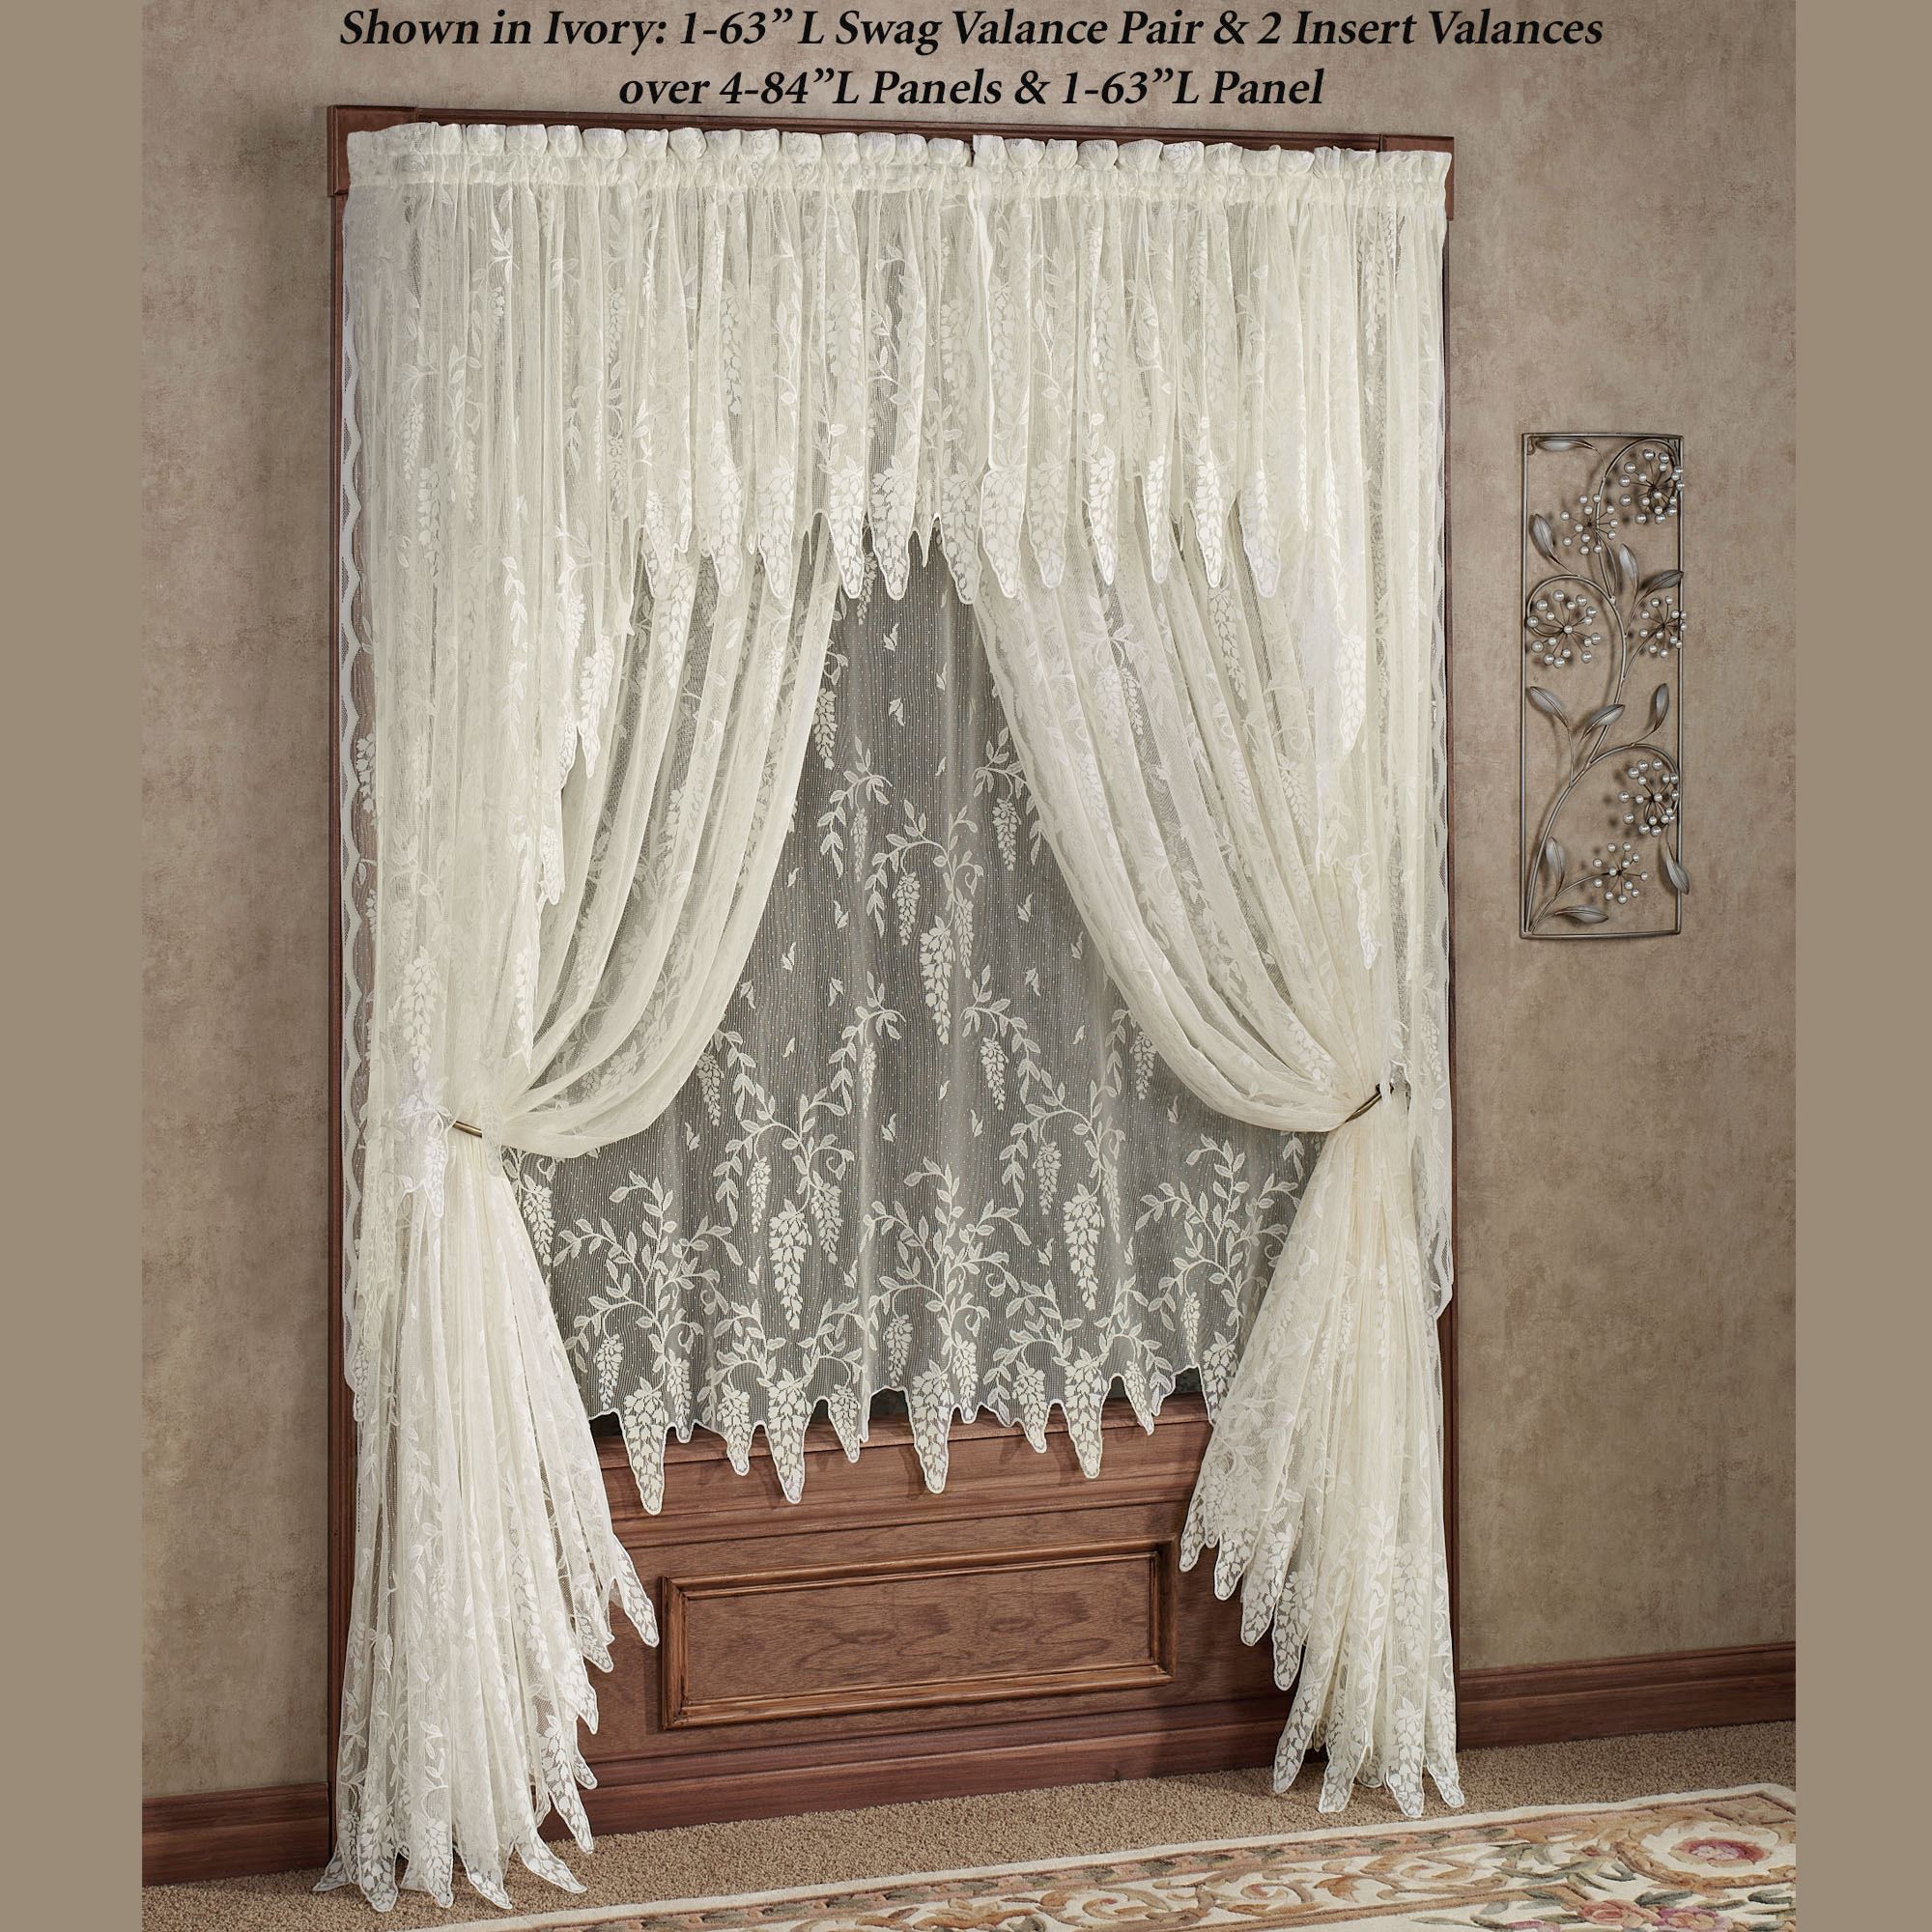 Exquisite Lace Curtains for Your Vintage Home Interior